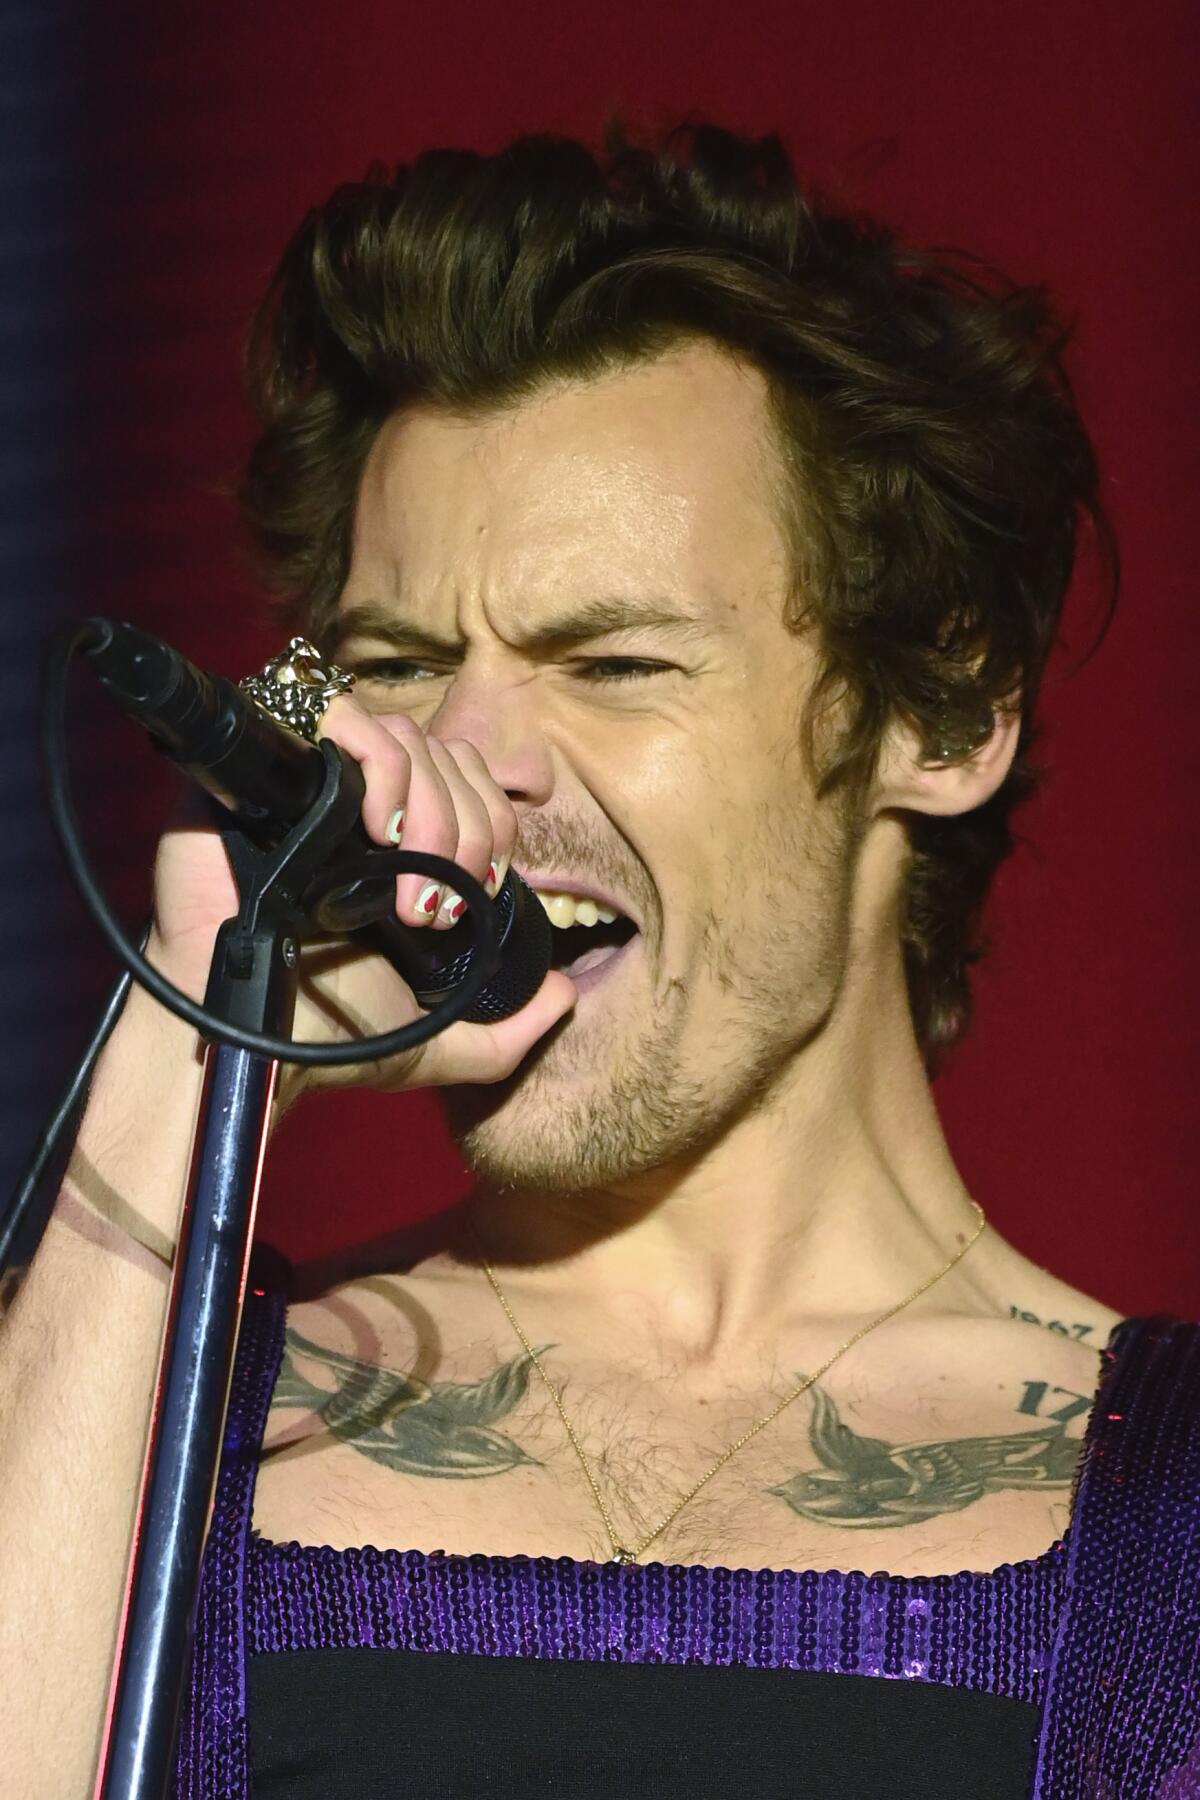 A man with tattoos on his chest sings ardently into a microphone